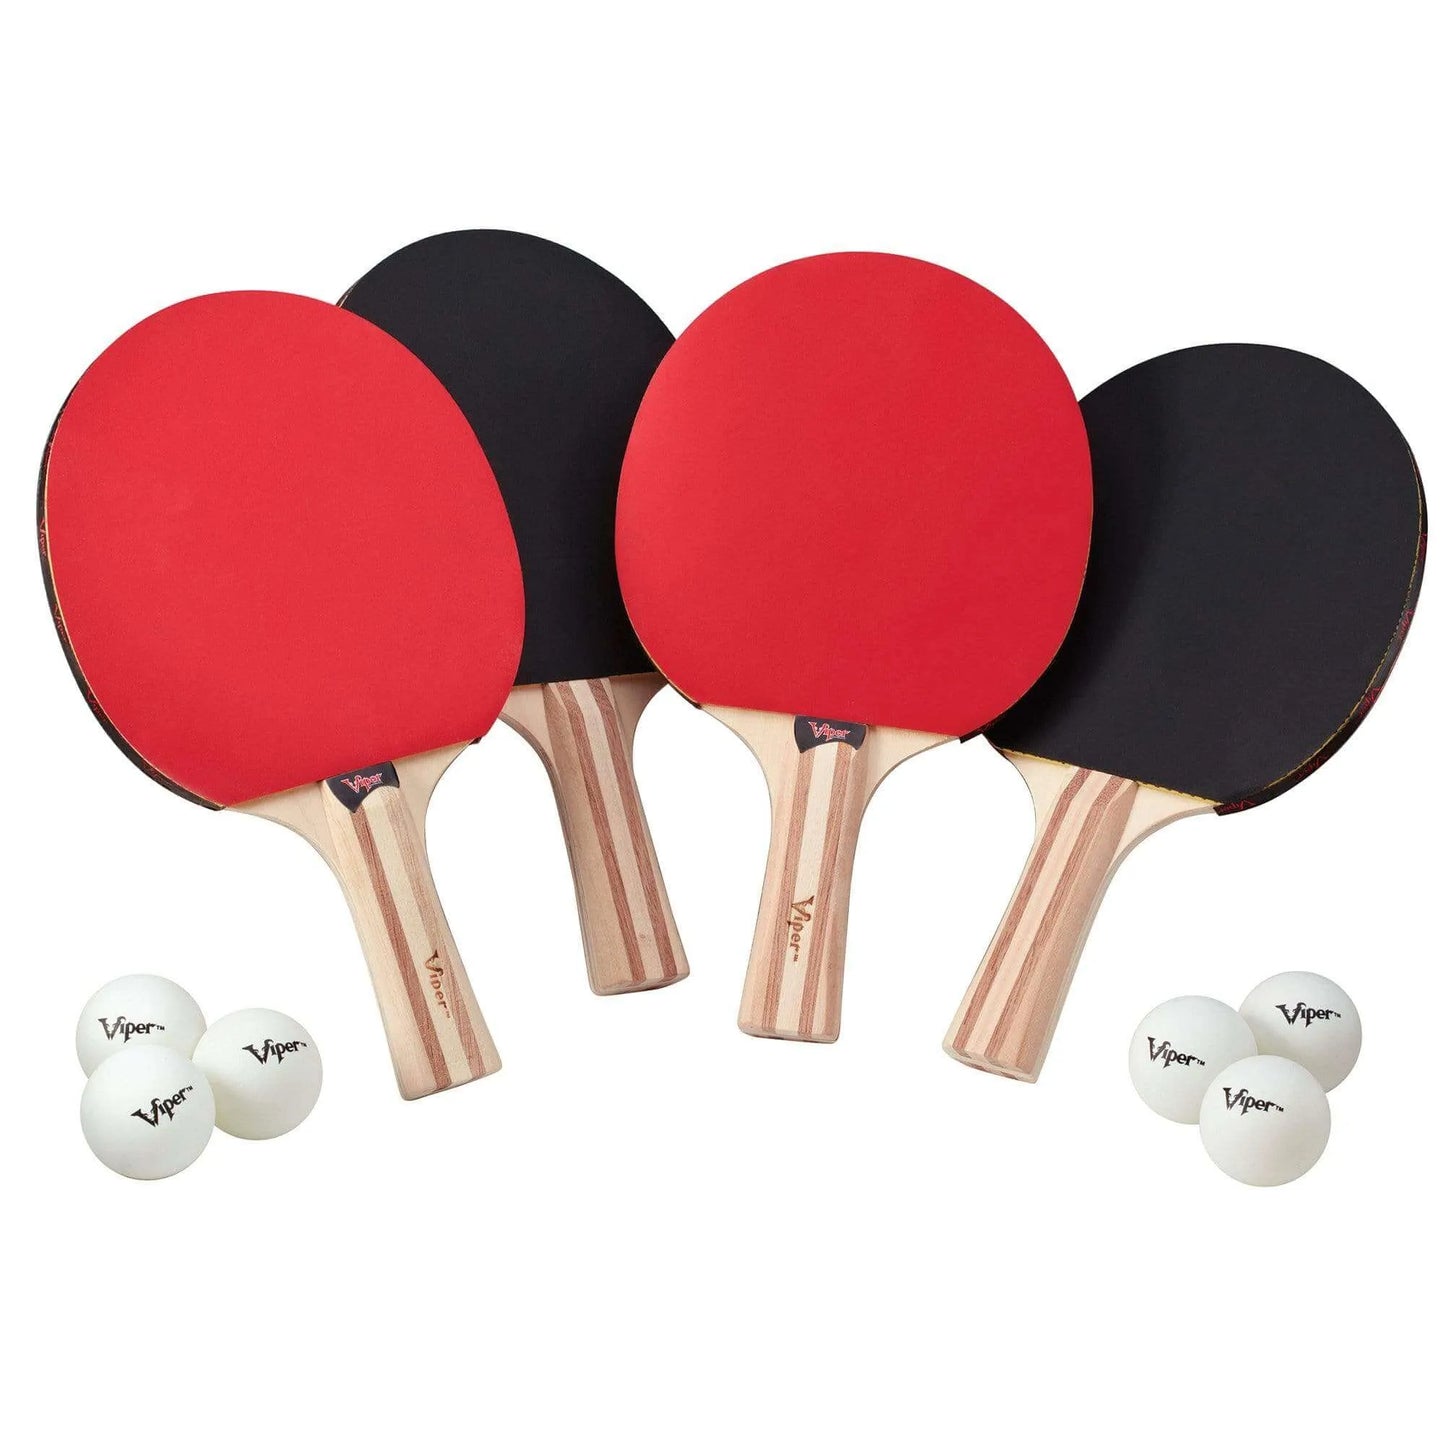 Game Table Accessories - Viper Two Star Tennis Table Four Racket And Six Ball Set